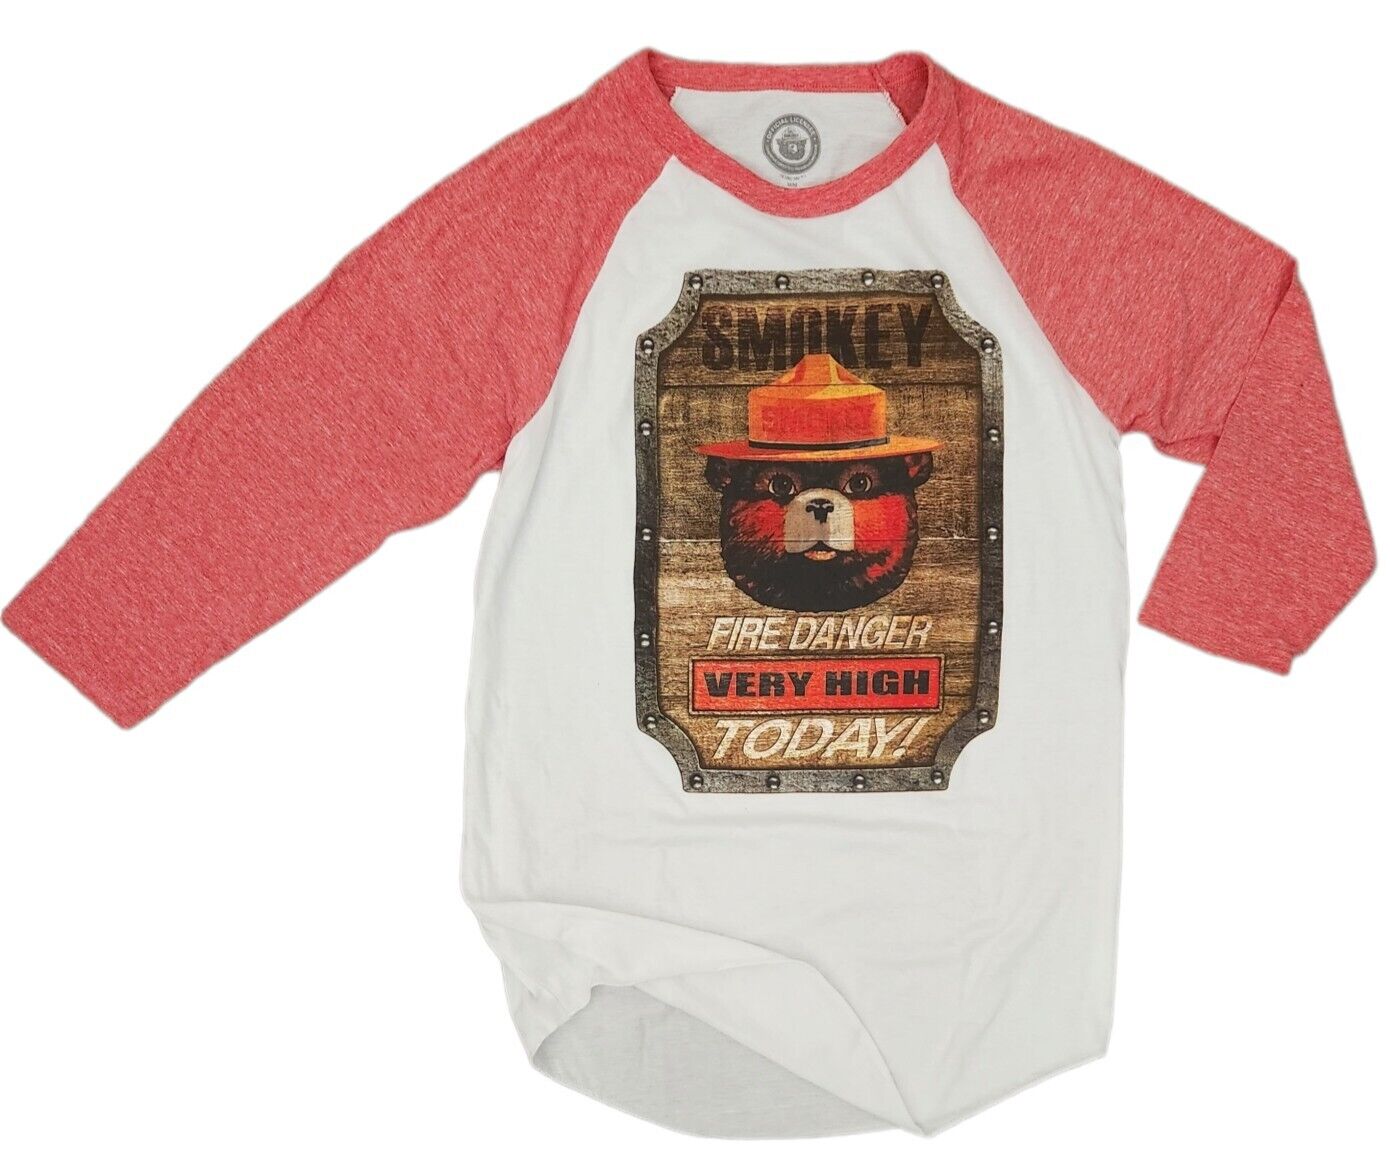 Smokey the Bear Baseball Style T-Shirt - White with Red Sleeves - Fire Danger Very High Today Print